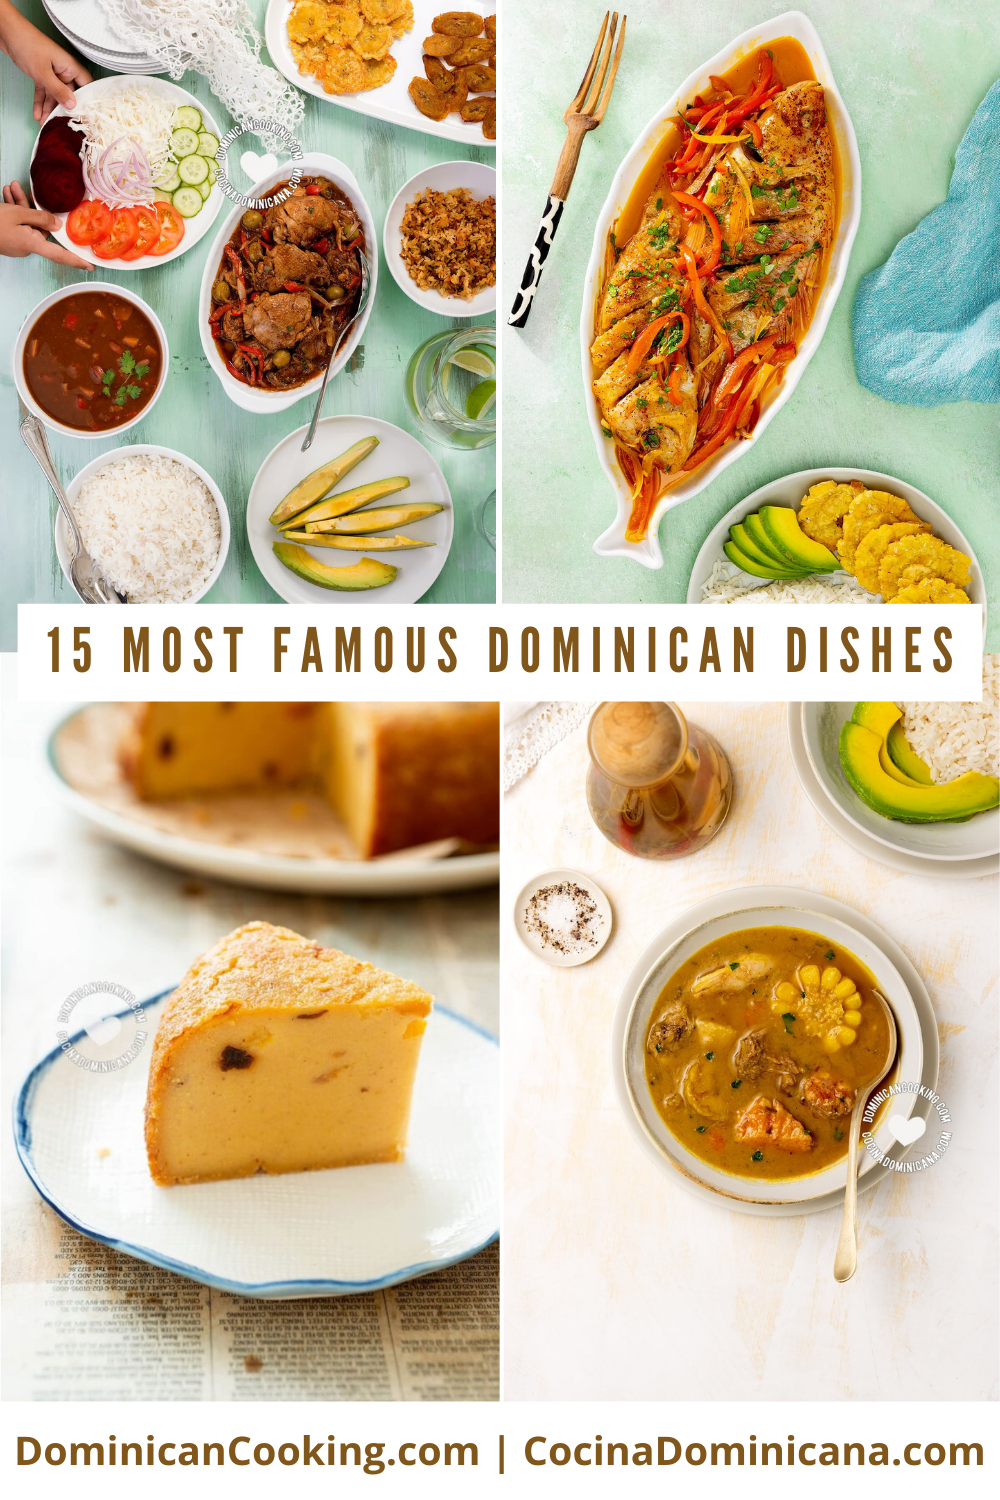 15 most famous Dominican dishes.